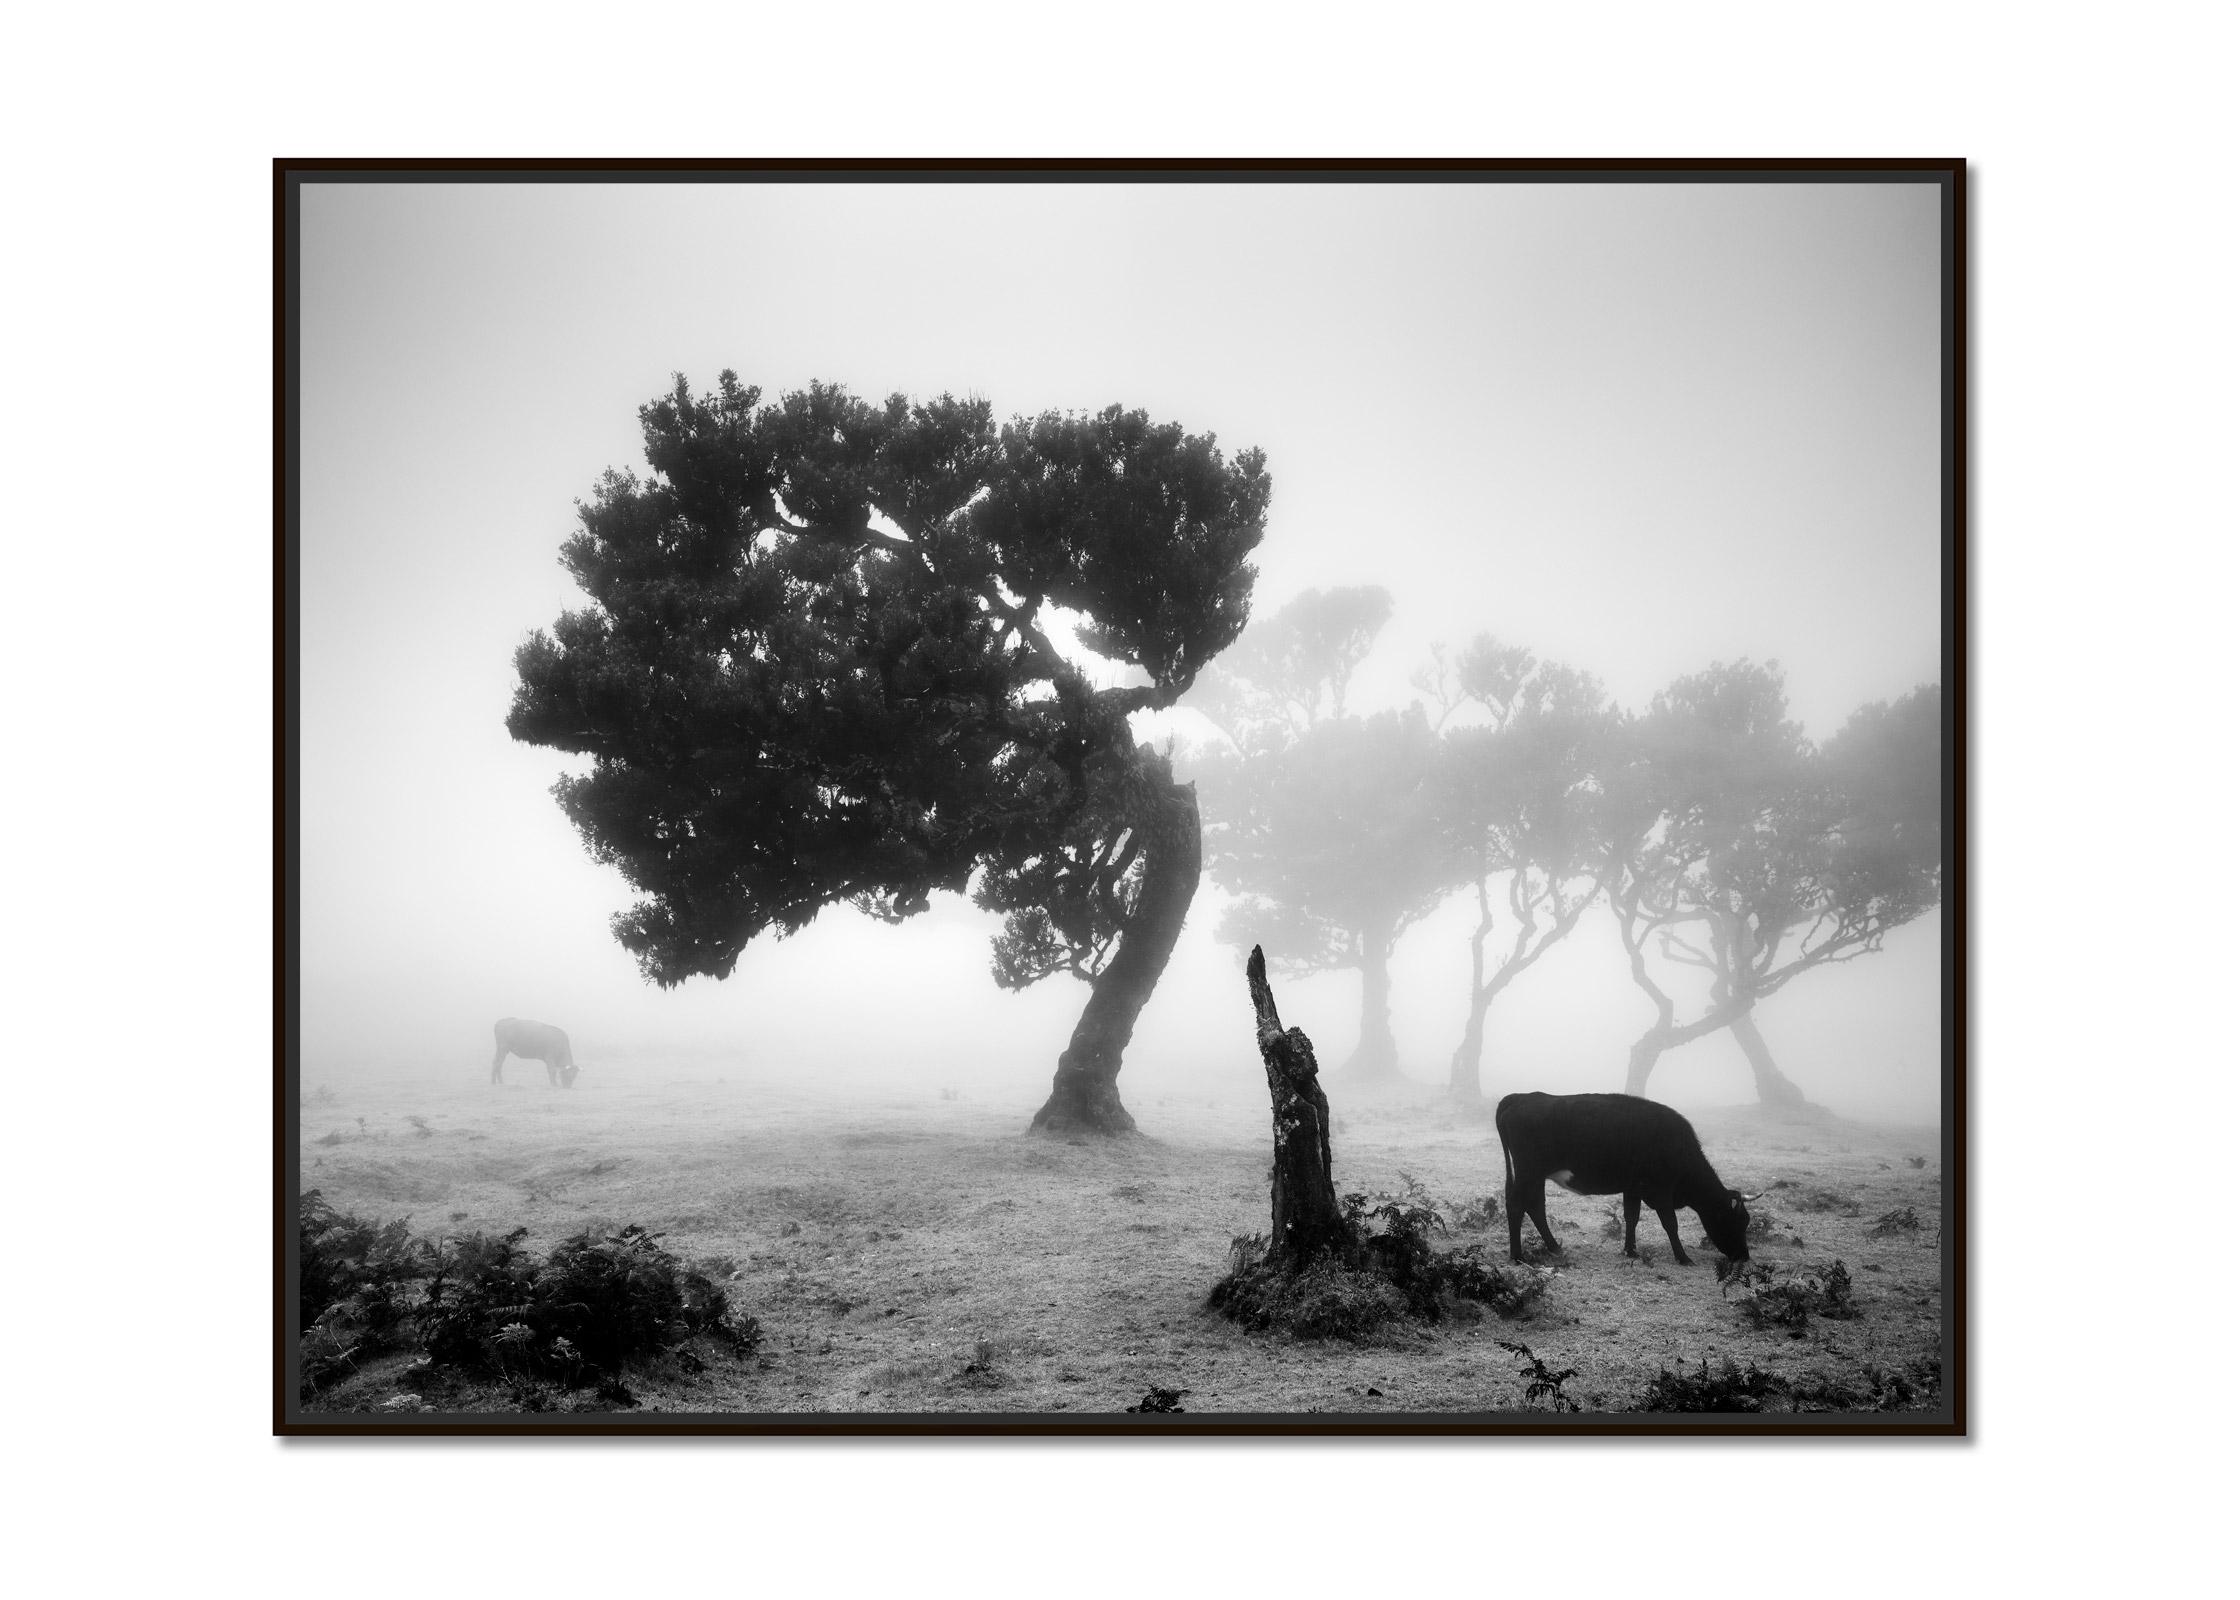 Cows on the foggy Pasture, misty forest, black and white photography, landscape - Photograph by Gerald Berghammer